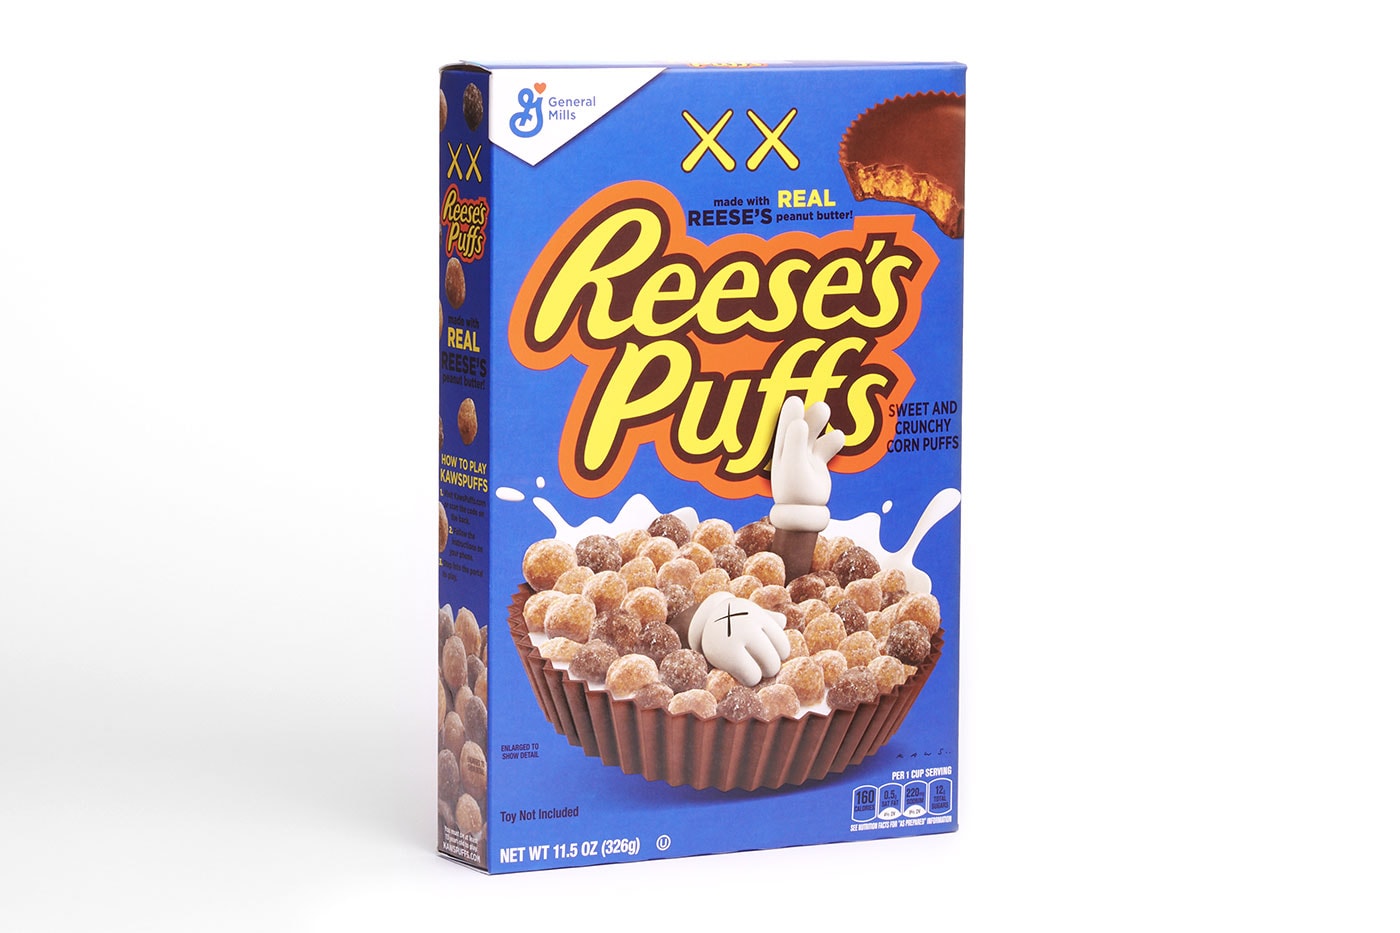 Reeses Puff's Officially Teams up With KAWS to Launch Two Cereal Boxes and AR Game Reese's Puff x KAWS Cereal Launch Release Info general mills cereal kaws companion kawspuffs